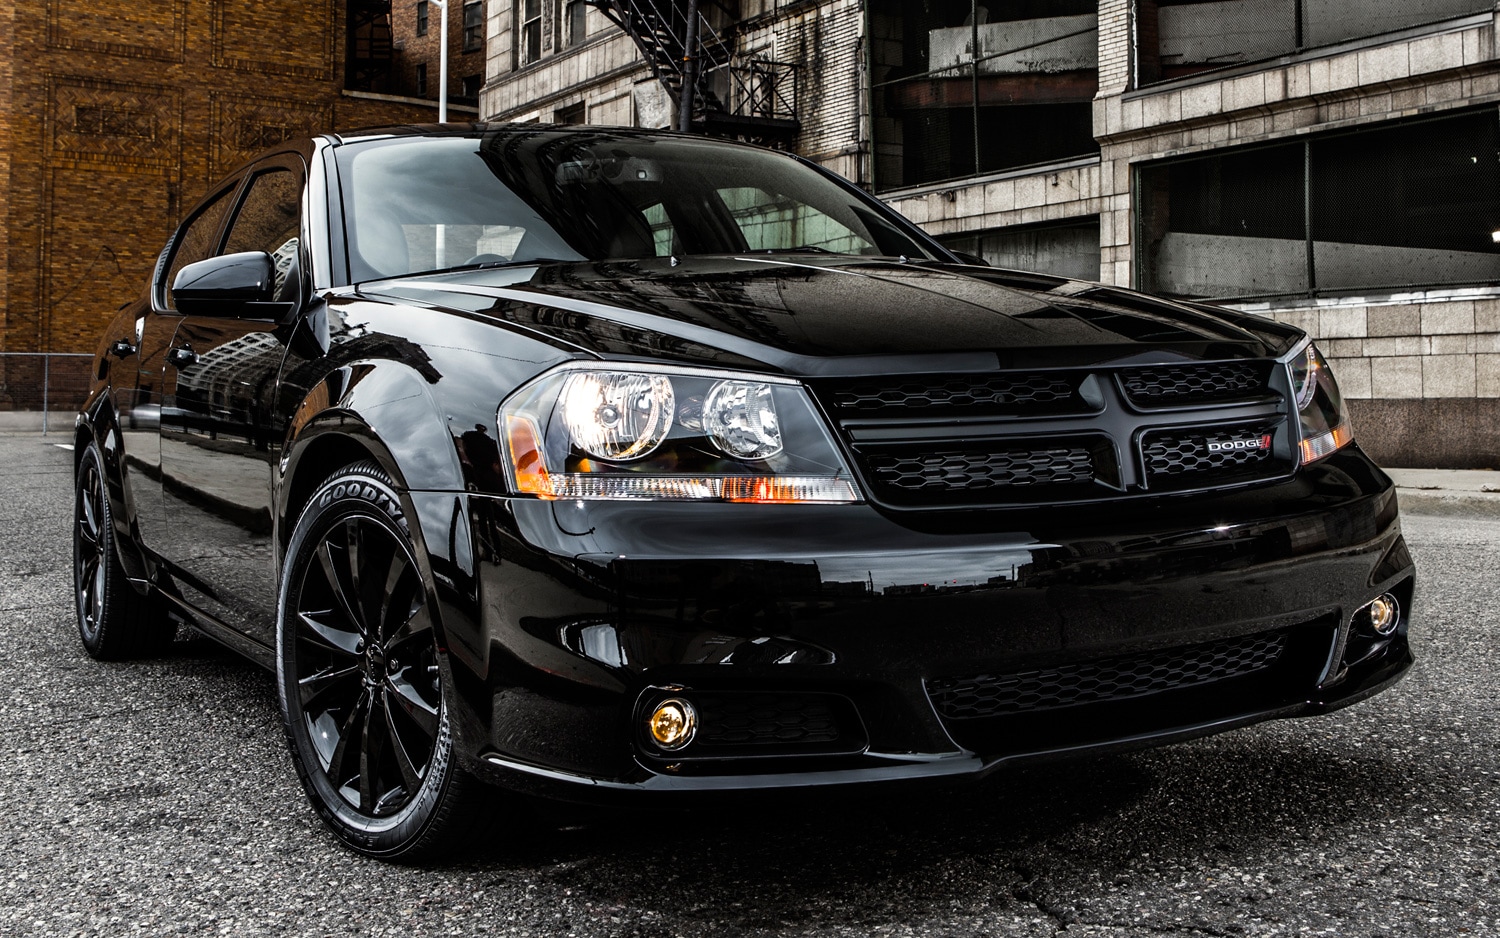 Dodge Expands Blacktop Appearance Package to 2013 Avenger, Challenger R/T